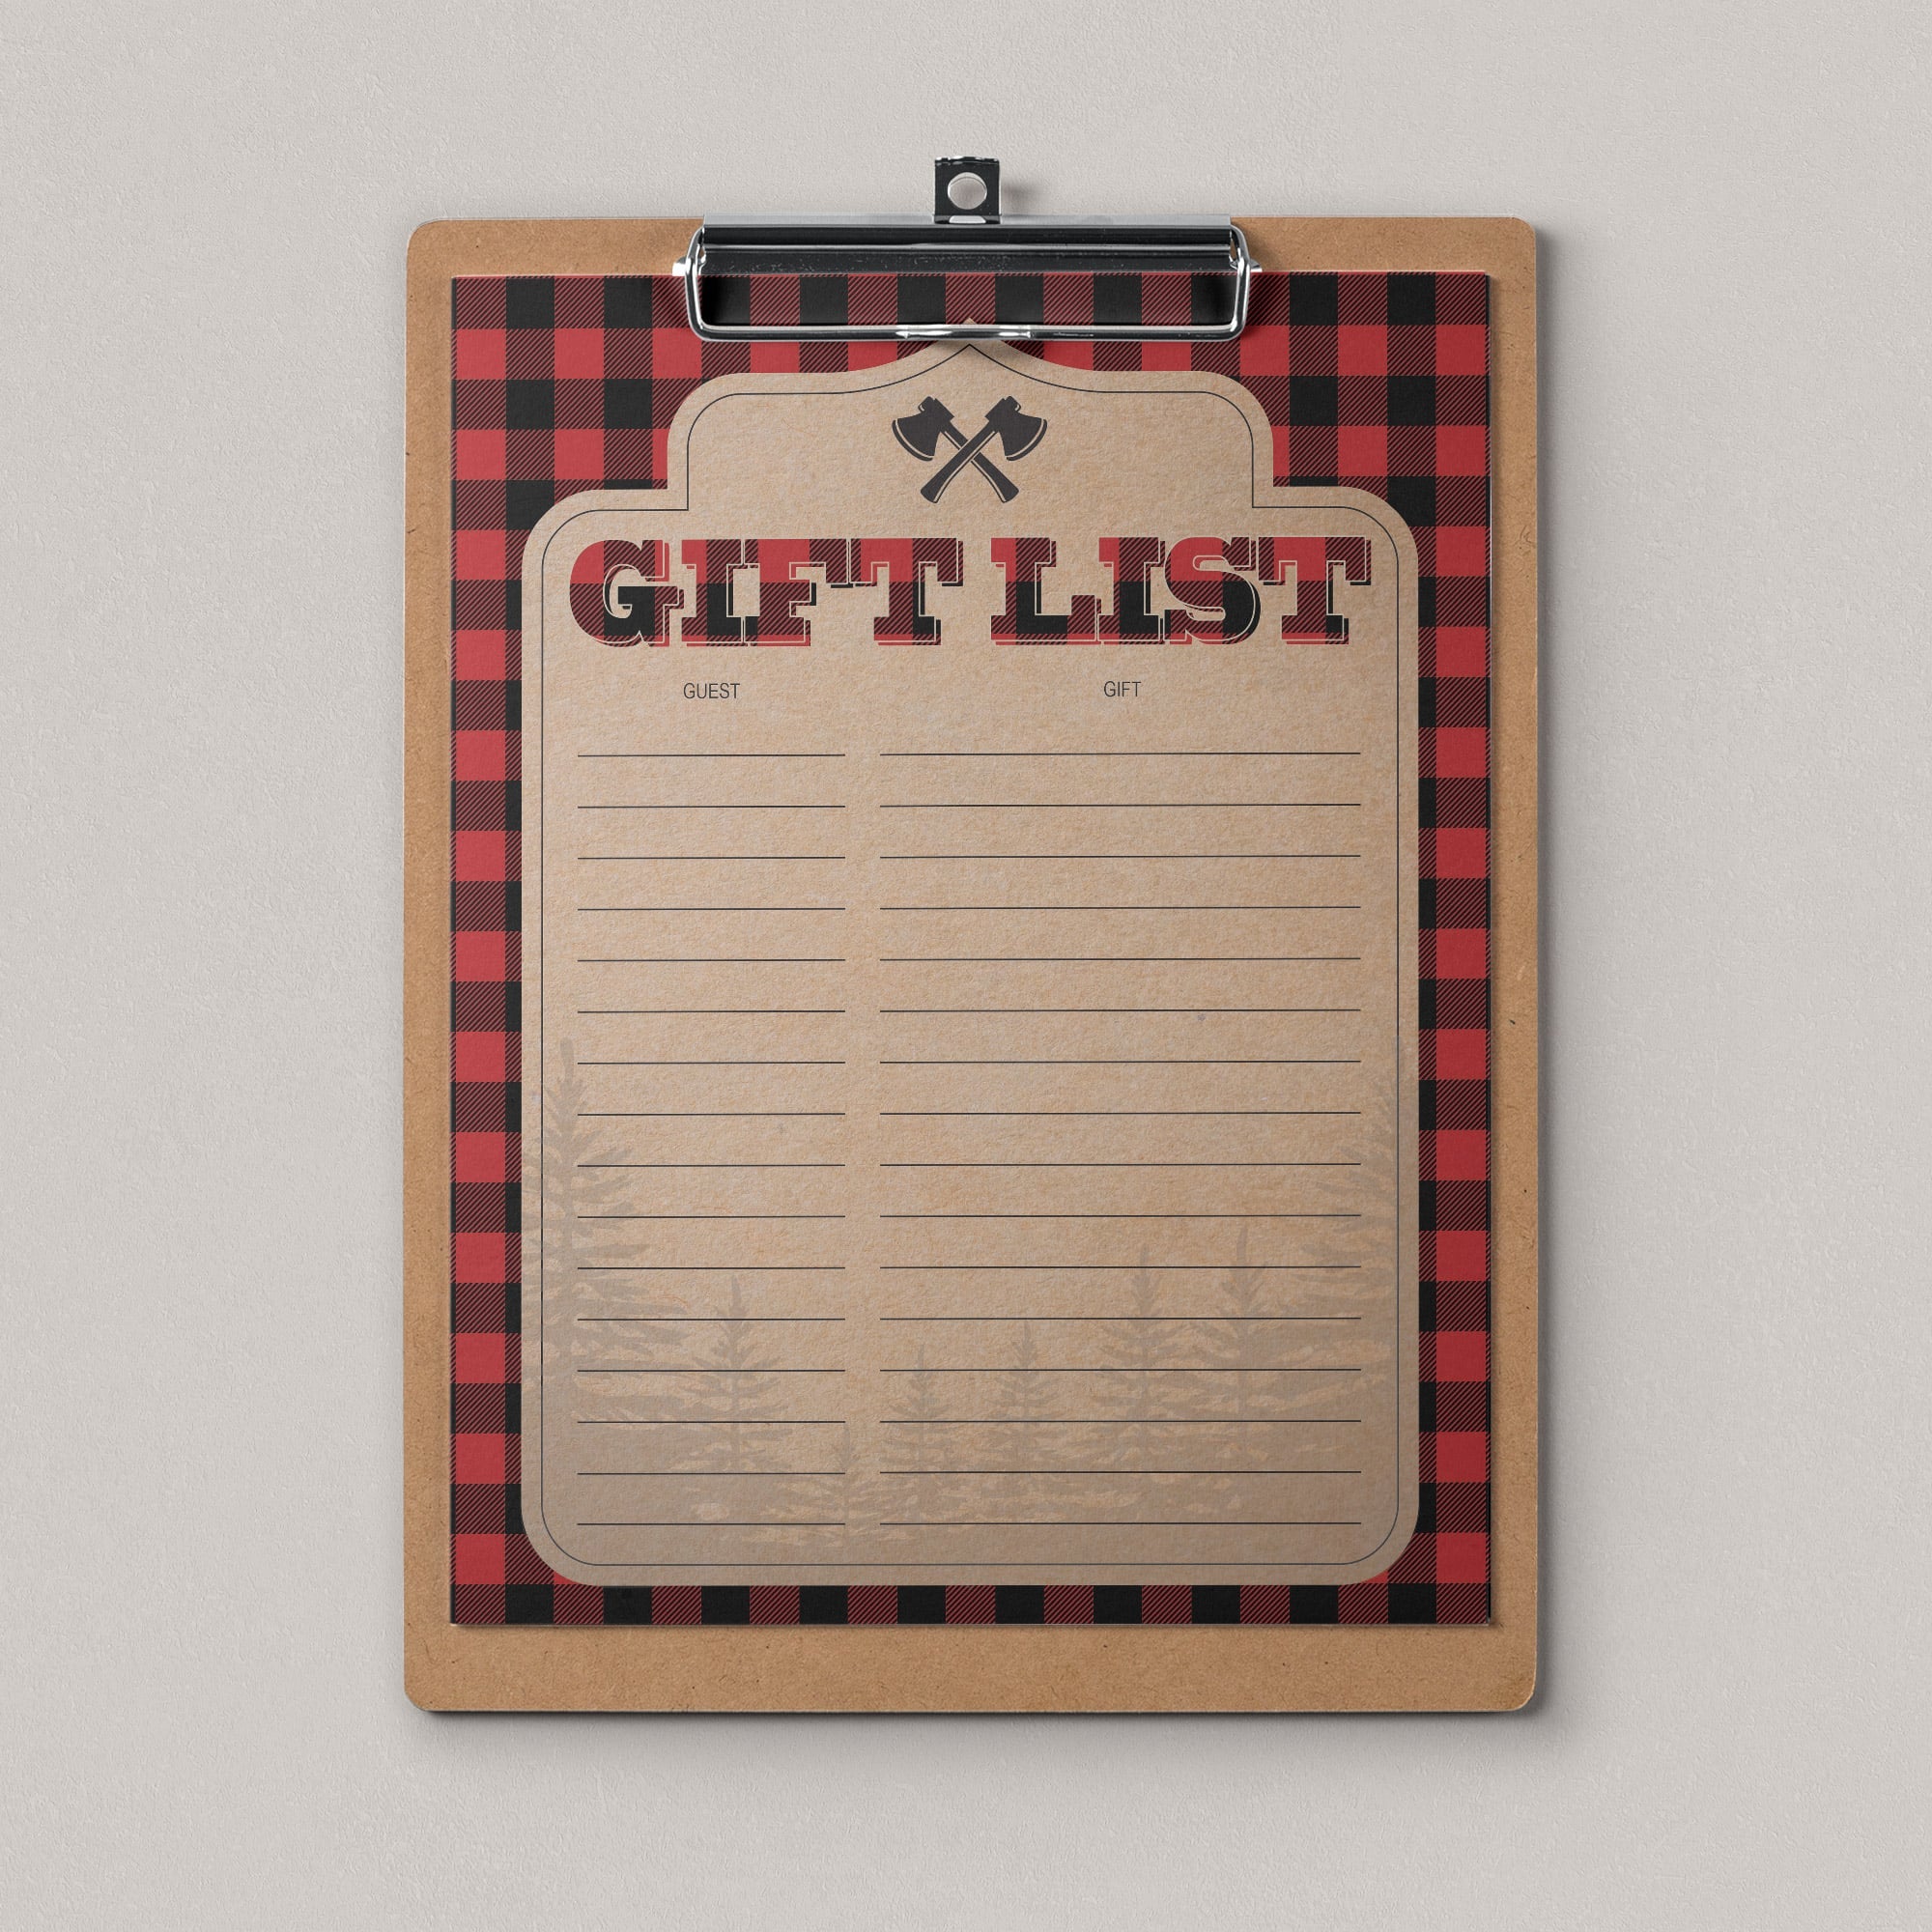 Printable gift list with rustic look by LittleSizzle